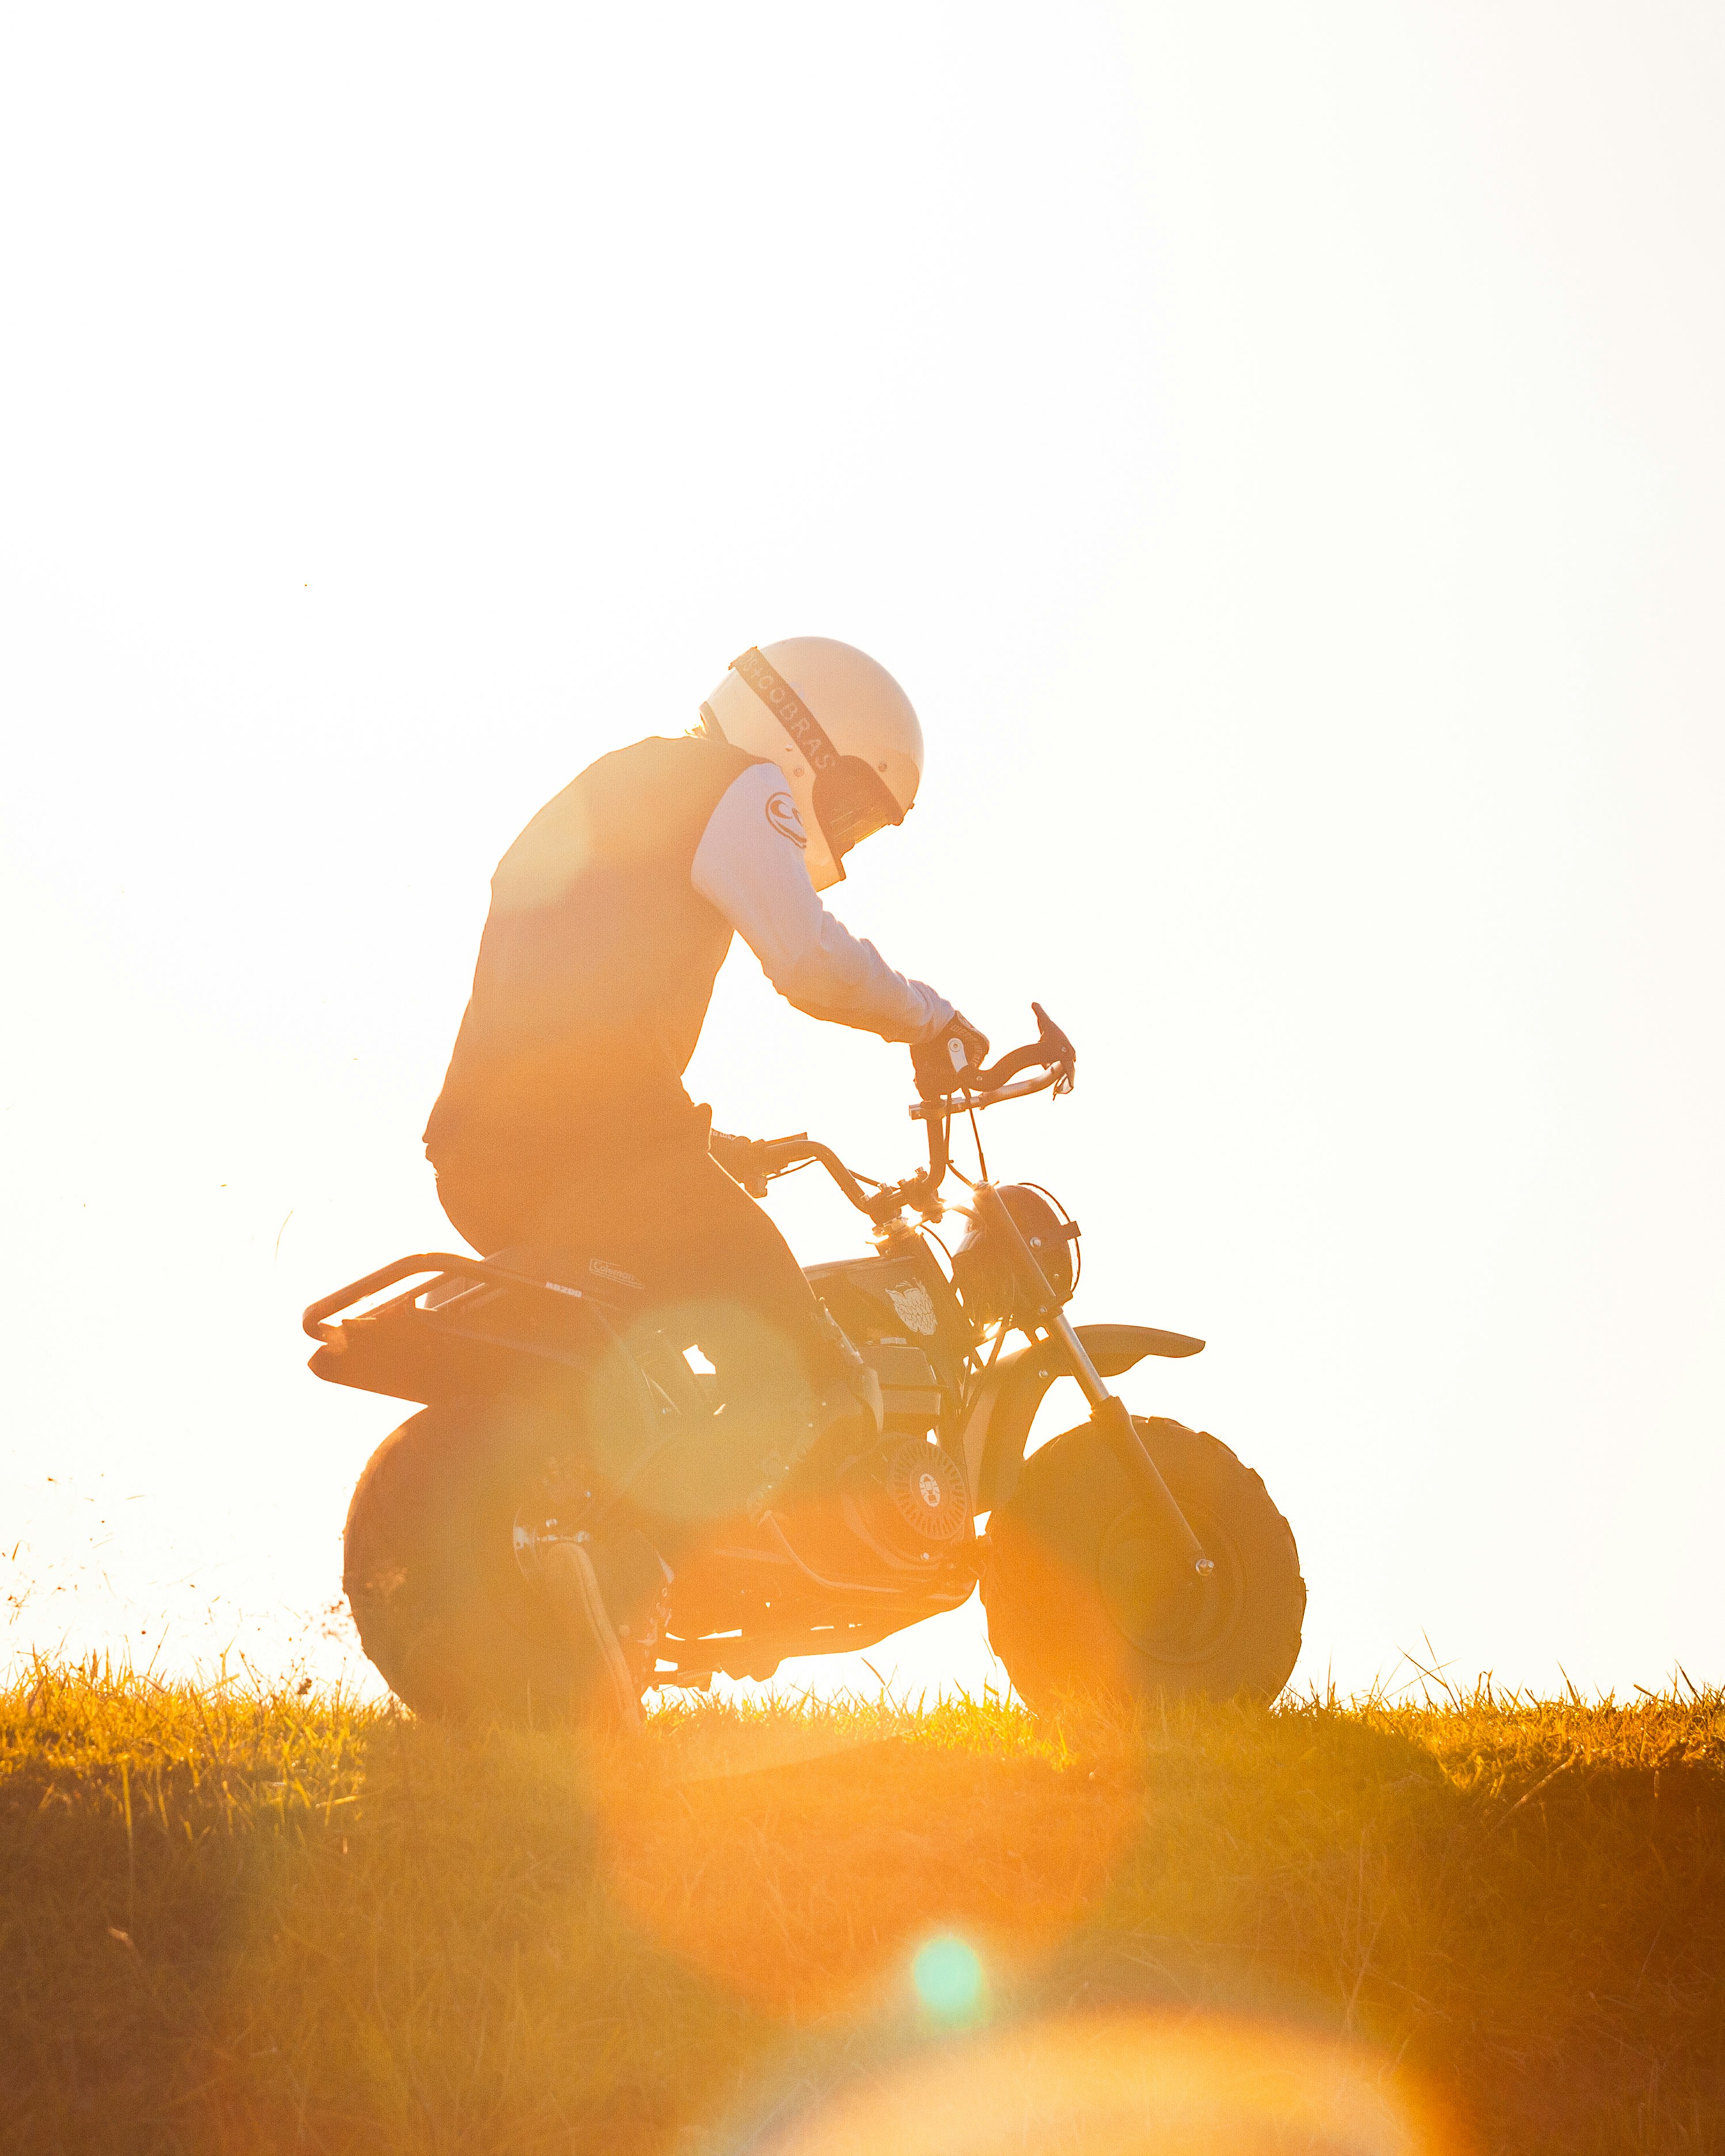 man riding motorcycle on grass field during daytime